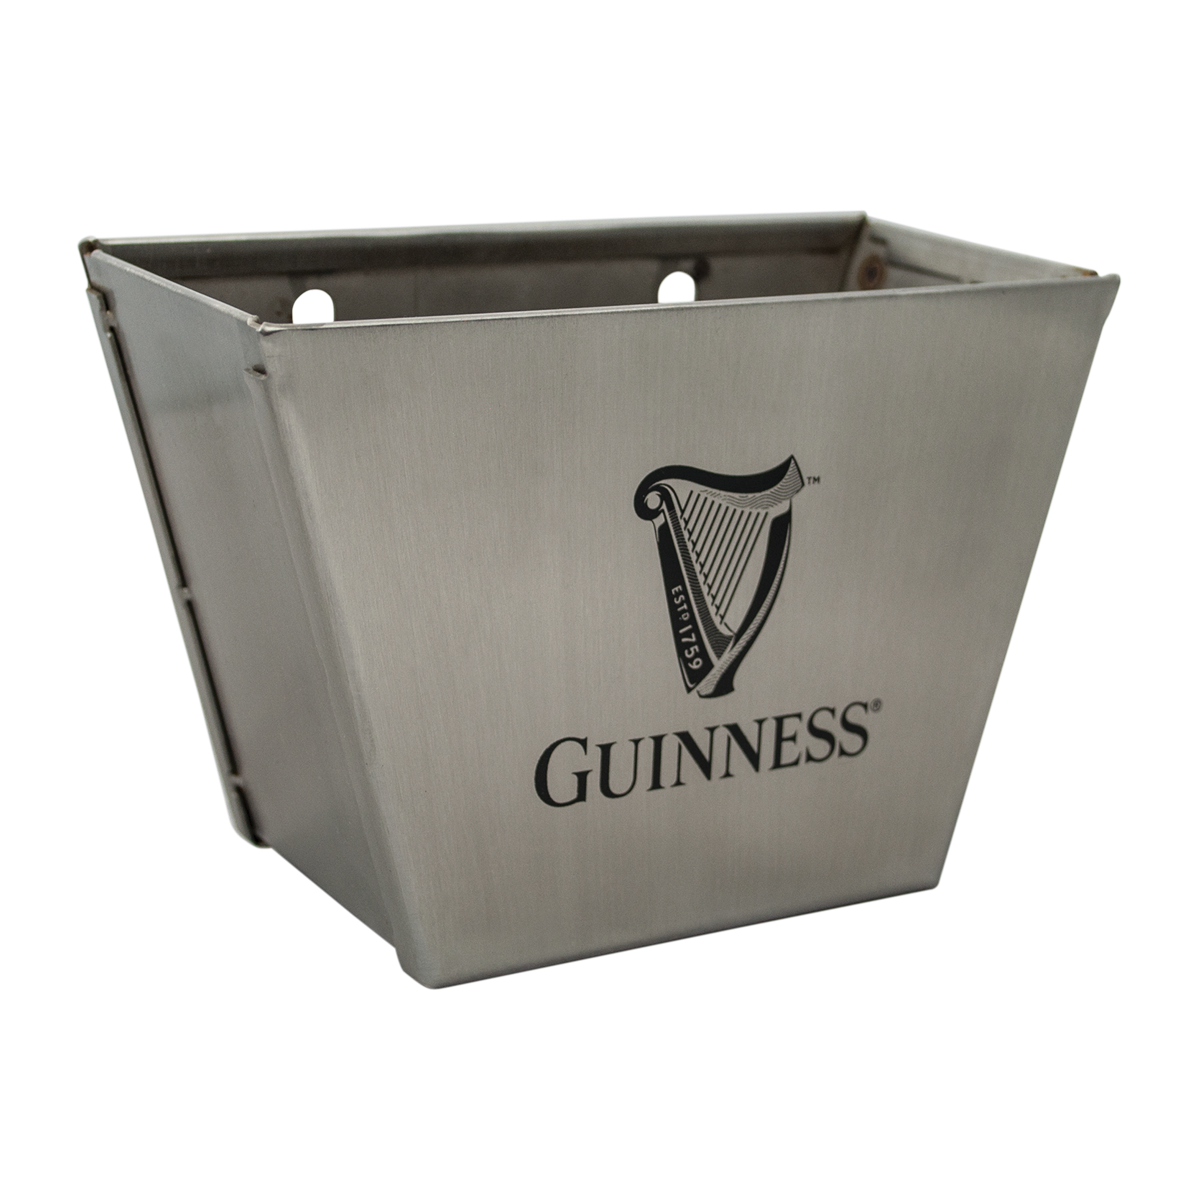 Guinness Cap Catcher - Signature Boxed beer bottle holder for your home bar.